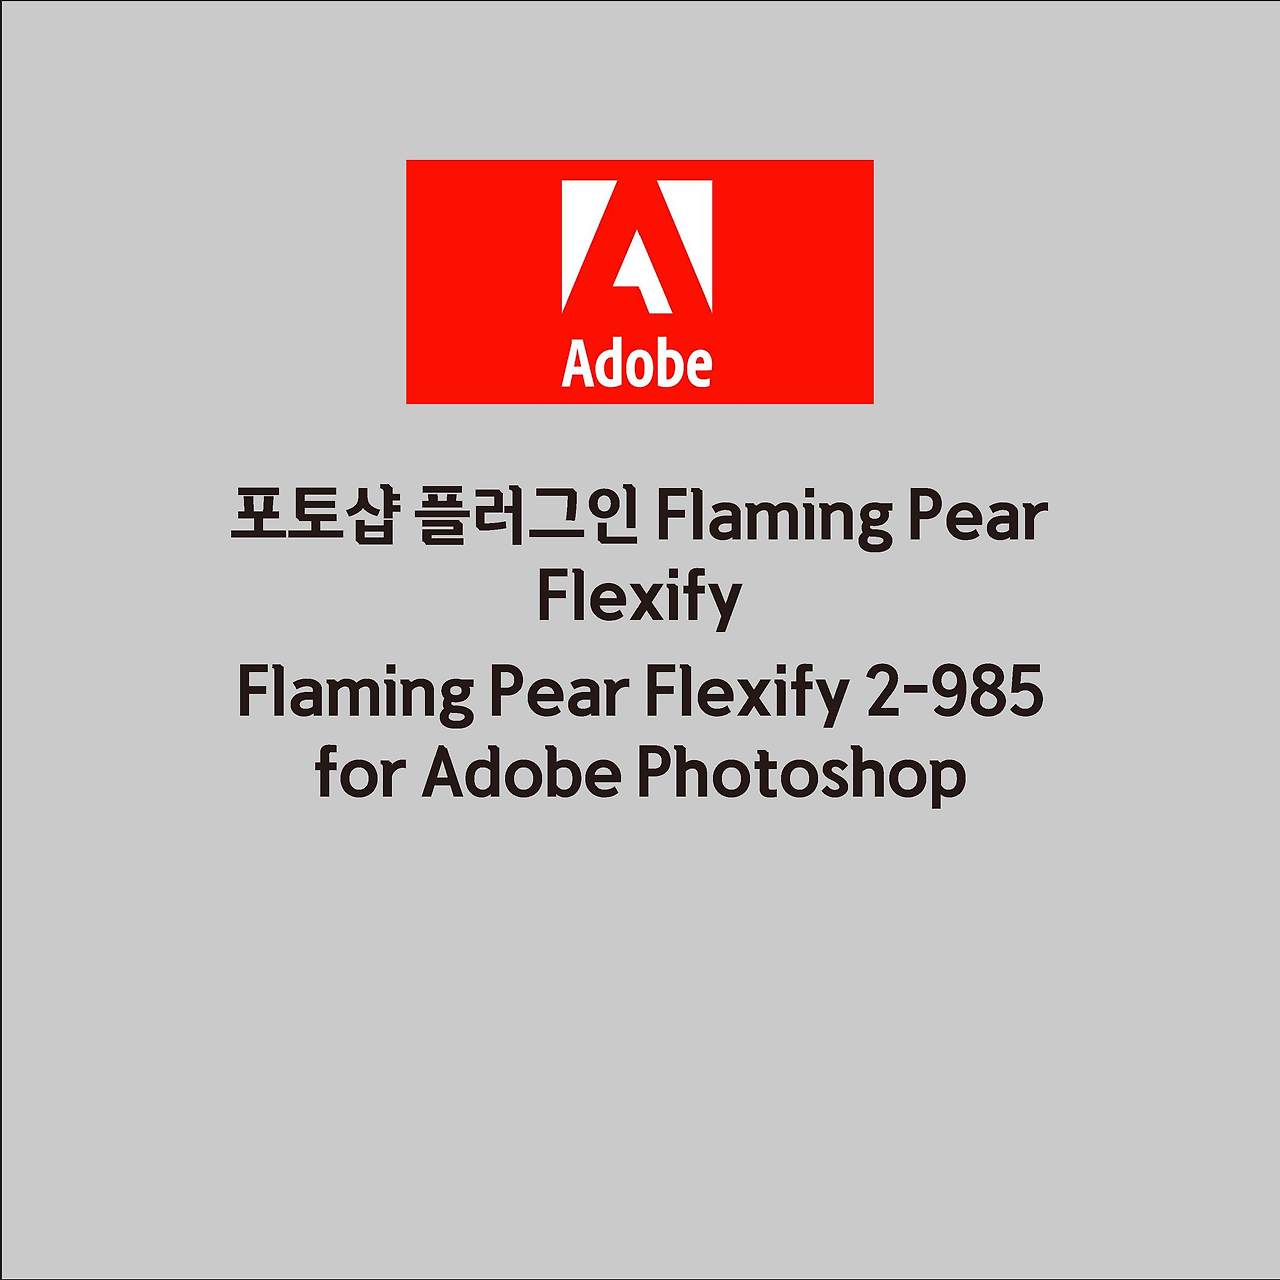 Flaming Pear Flexify 2.987 download the last version for apple